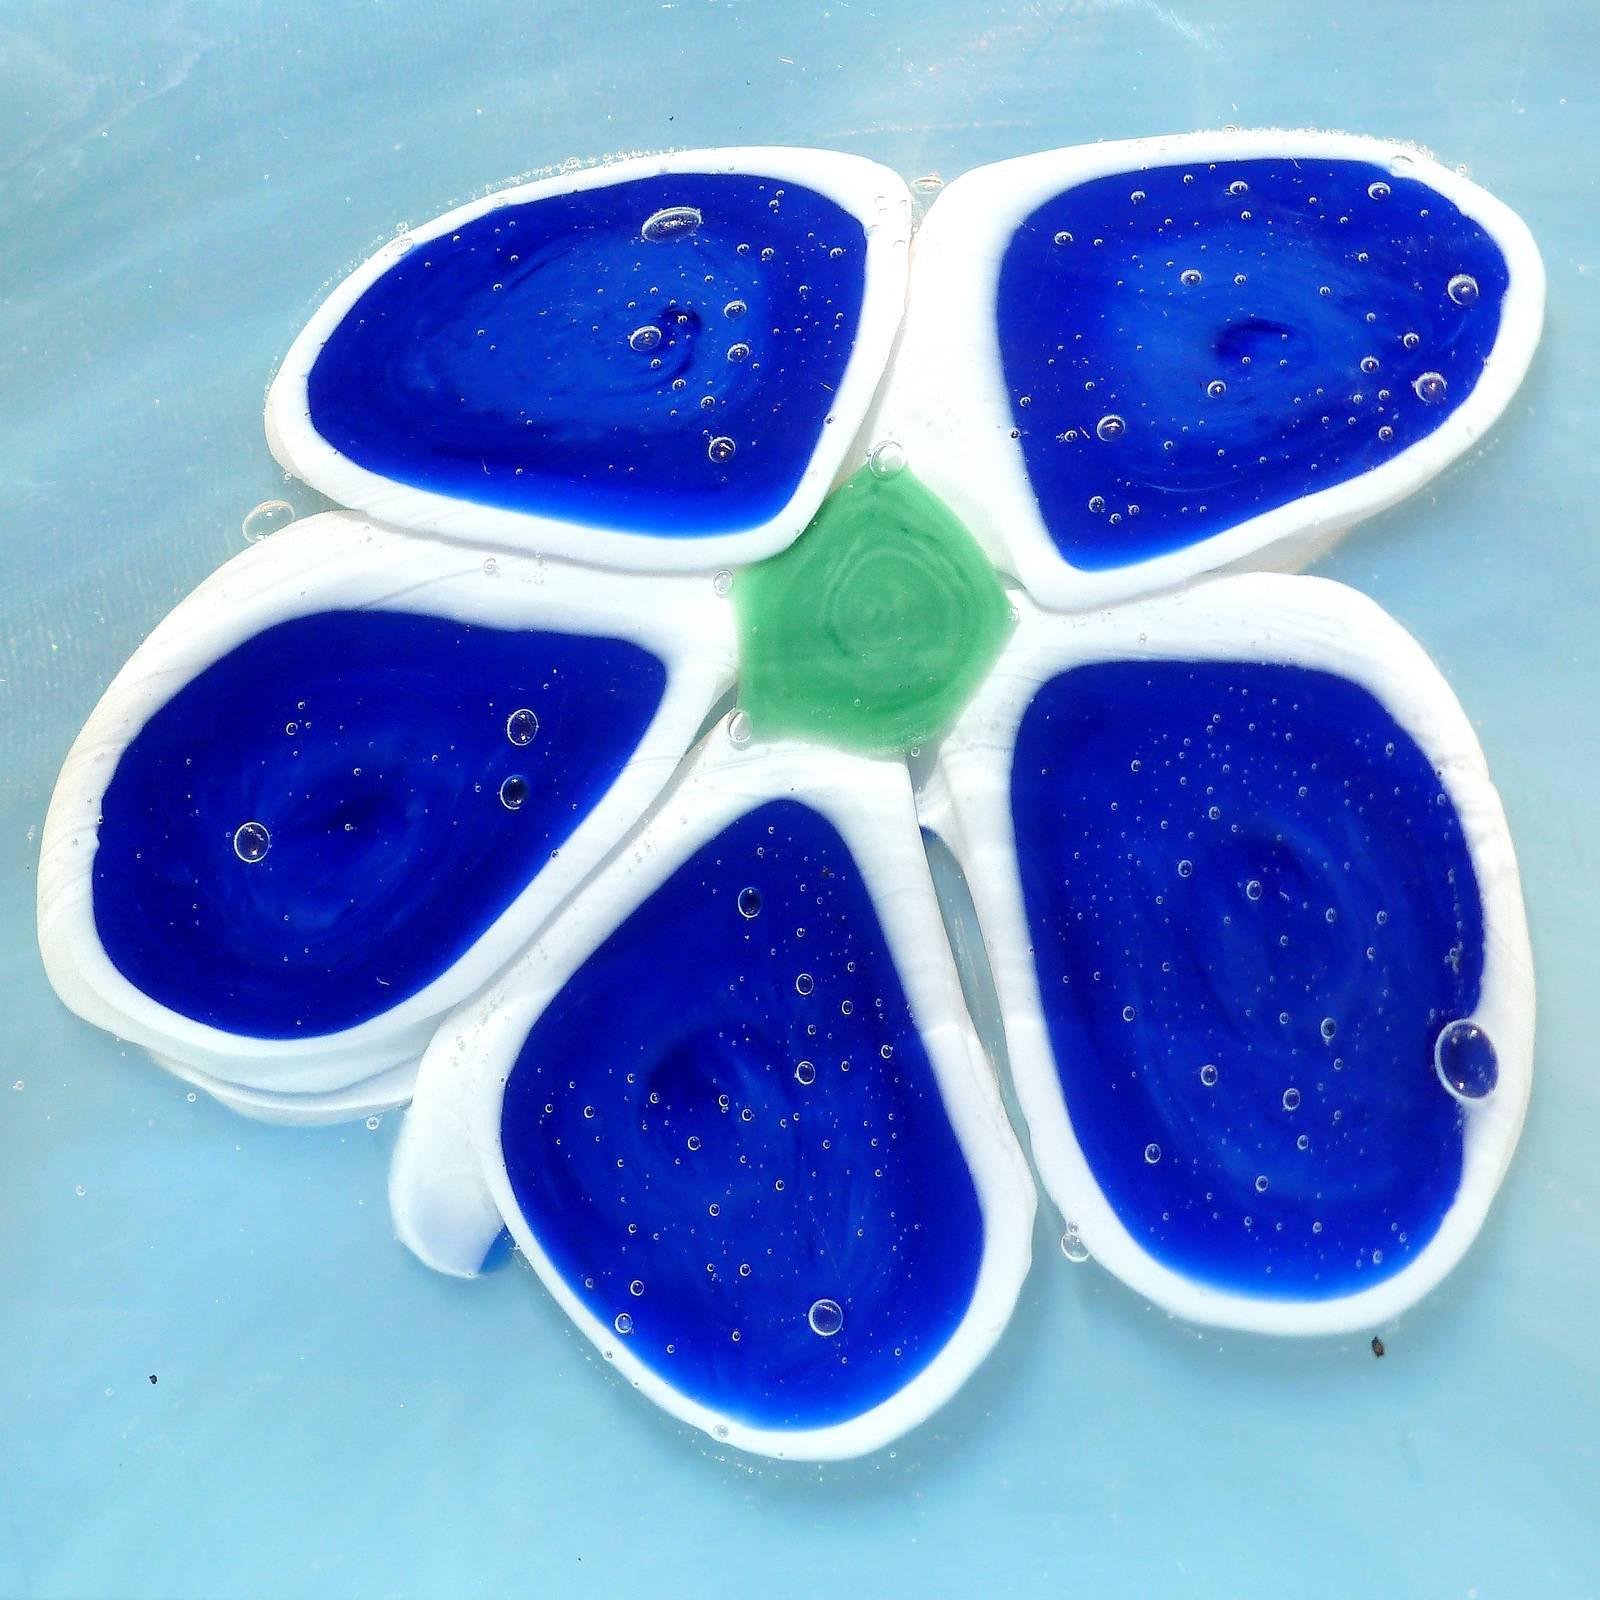 Hand-Crafted Fratelli Toso Murano Fiery Opal Blue Flowers Italian Art Glass Decorative Bowl